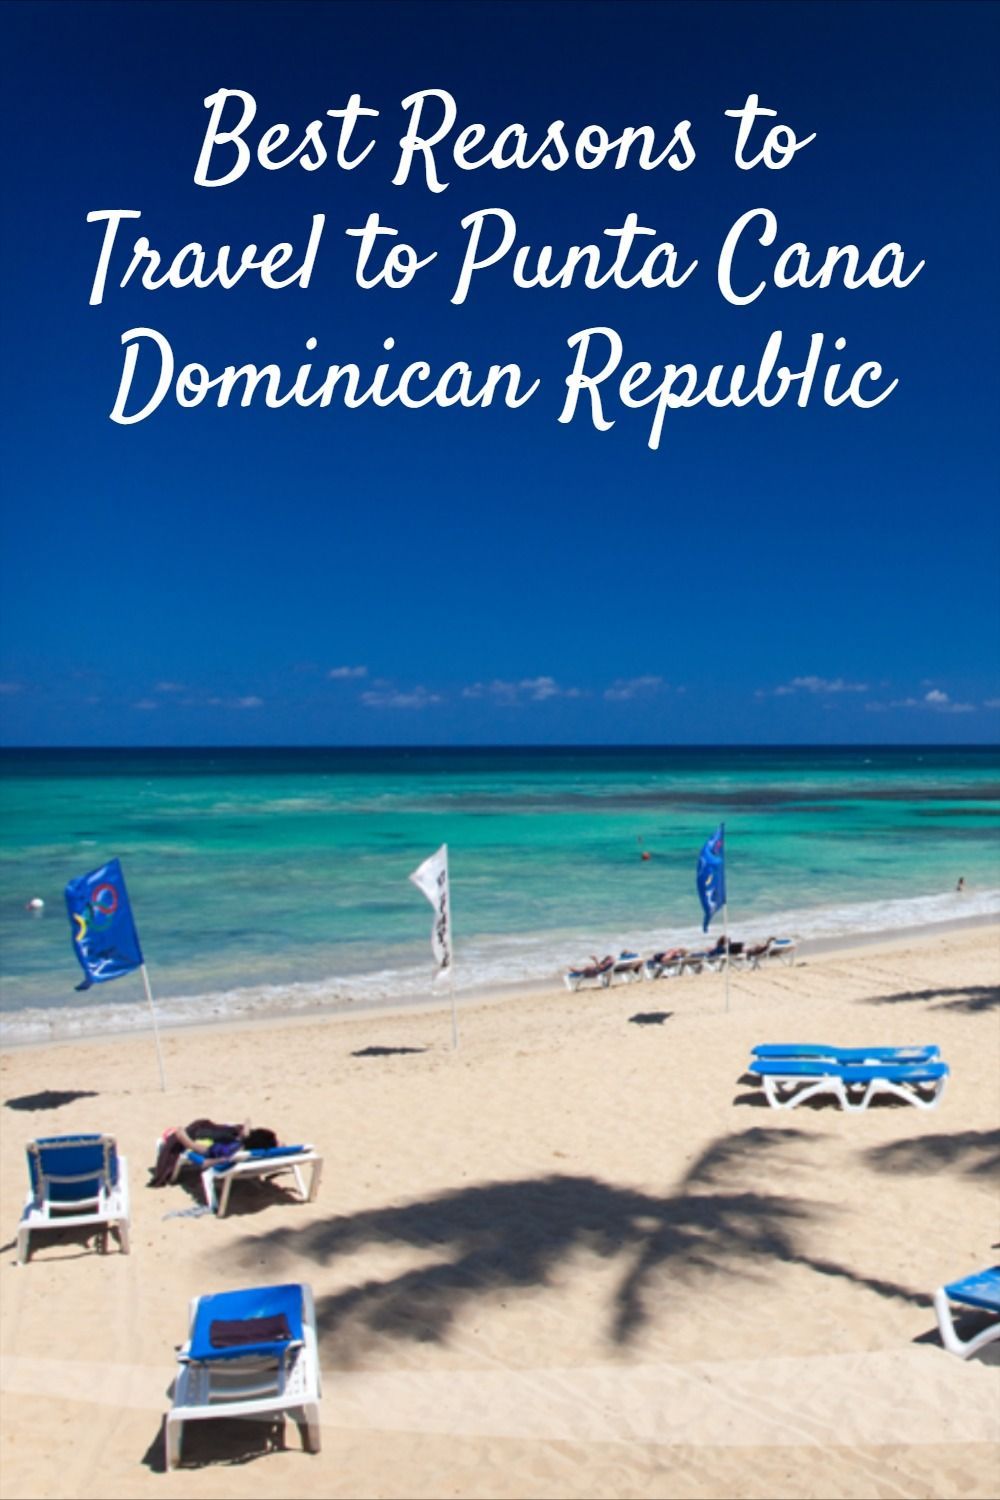 Best Reasons to Travel to Punta Cana Dominican Republic -   19 travel destinations Carribean dominican republic ideas